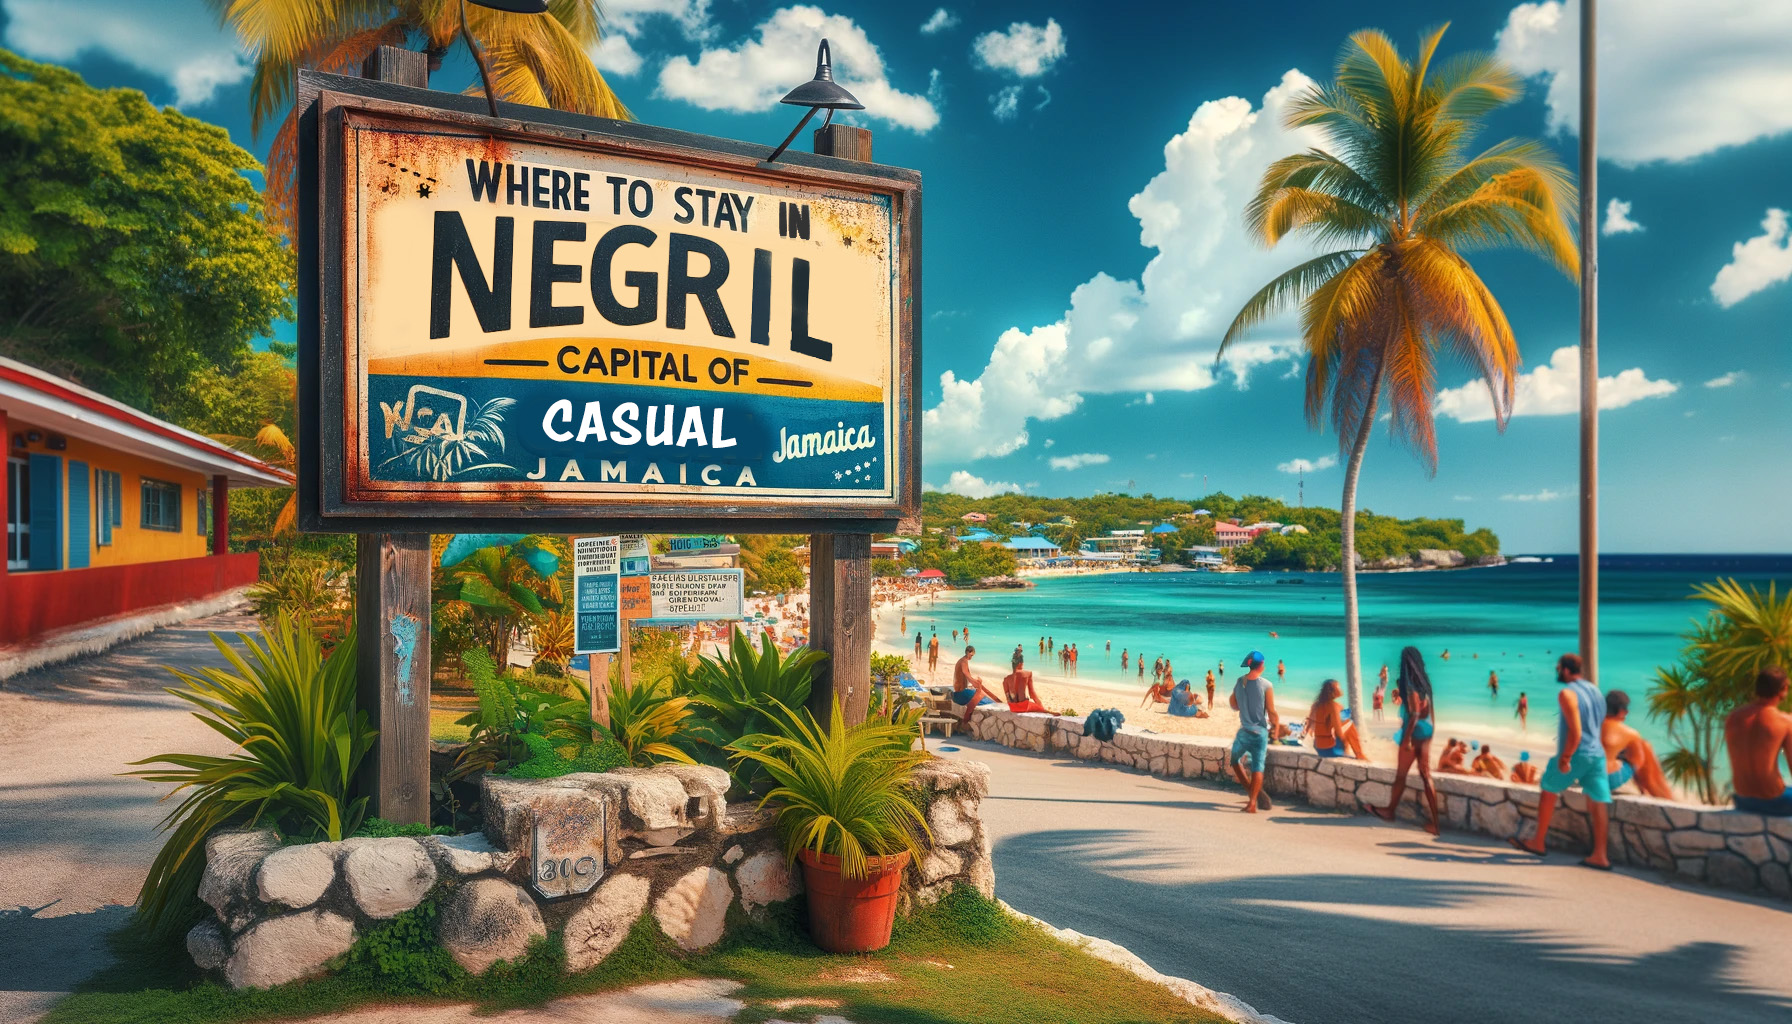 Where To Stay in Negril Capital of Casual Jamaica